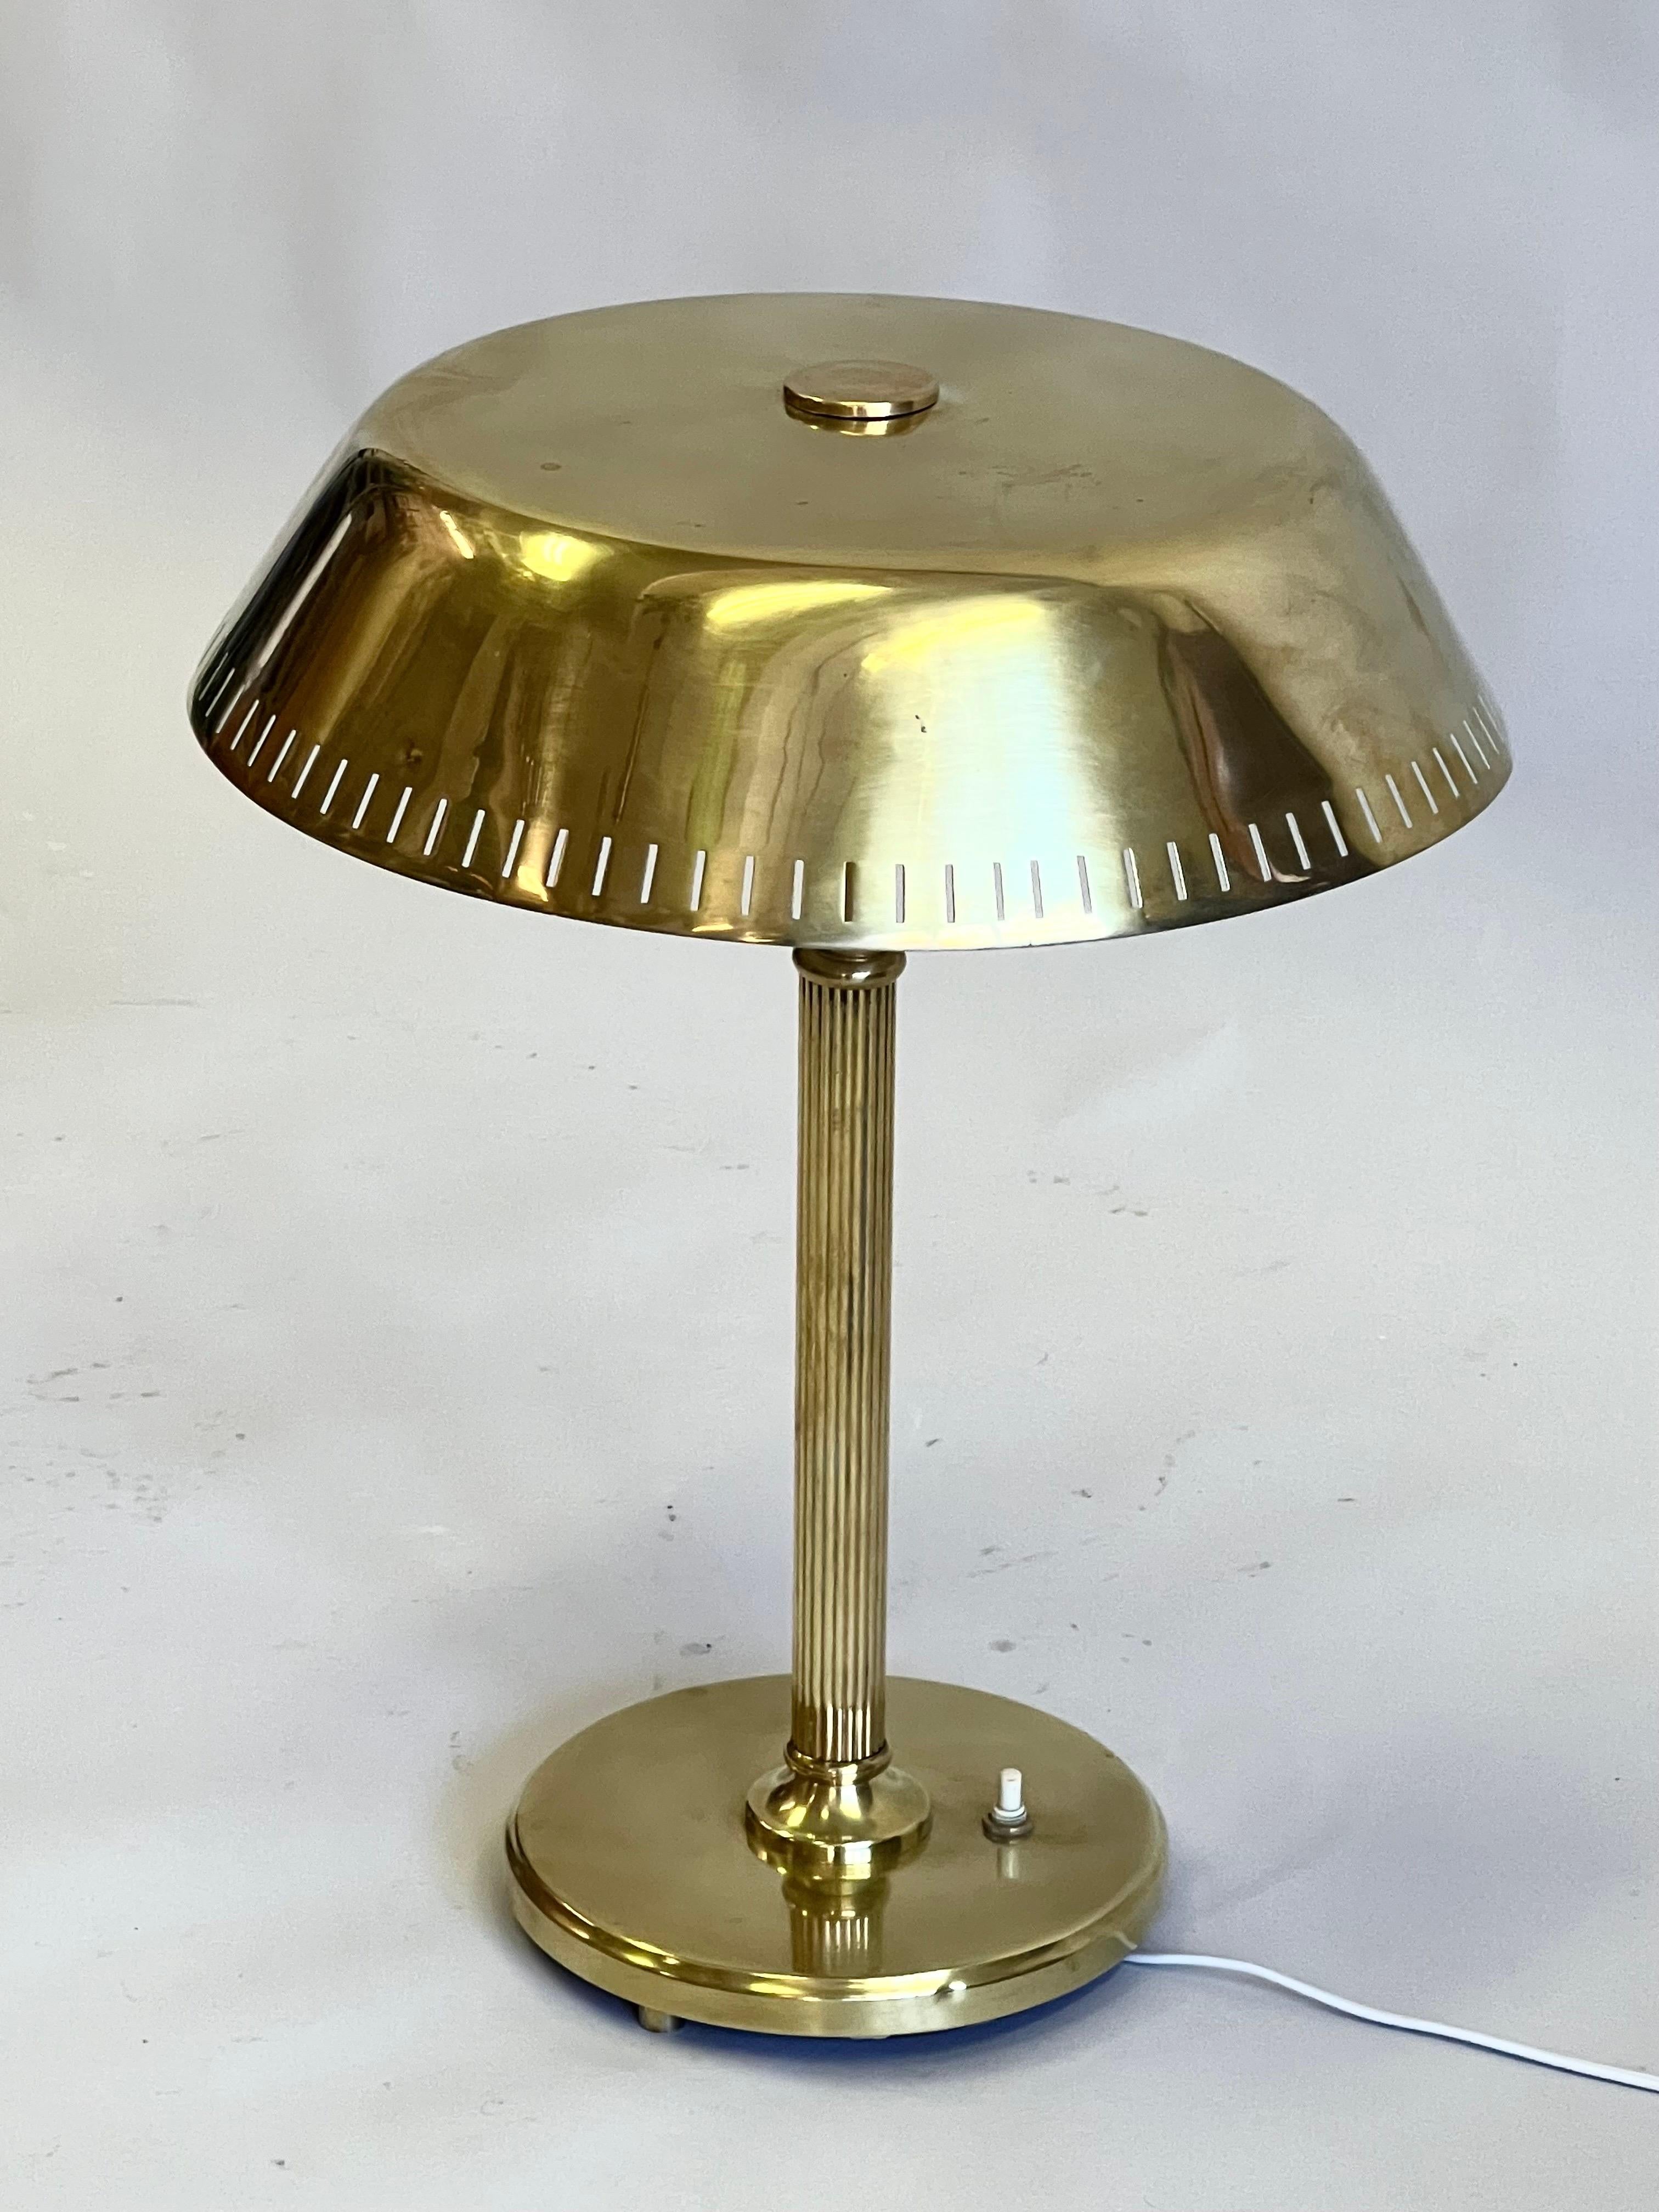 Finnish Scandinavian Modern Neoclassical Brass Table / Desk Lamp Attr. to Paavo Tynell  For Sale